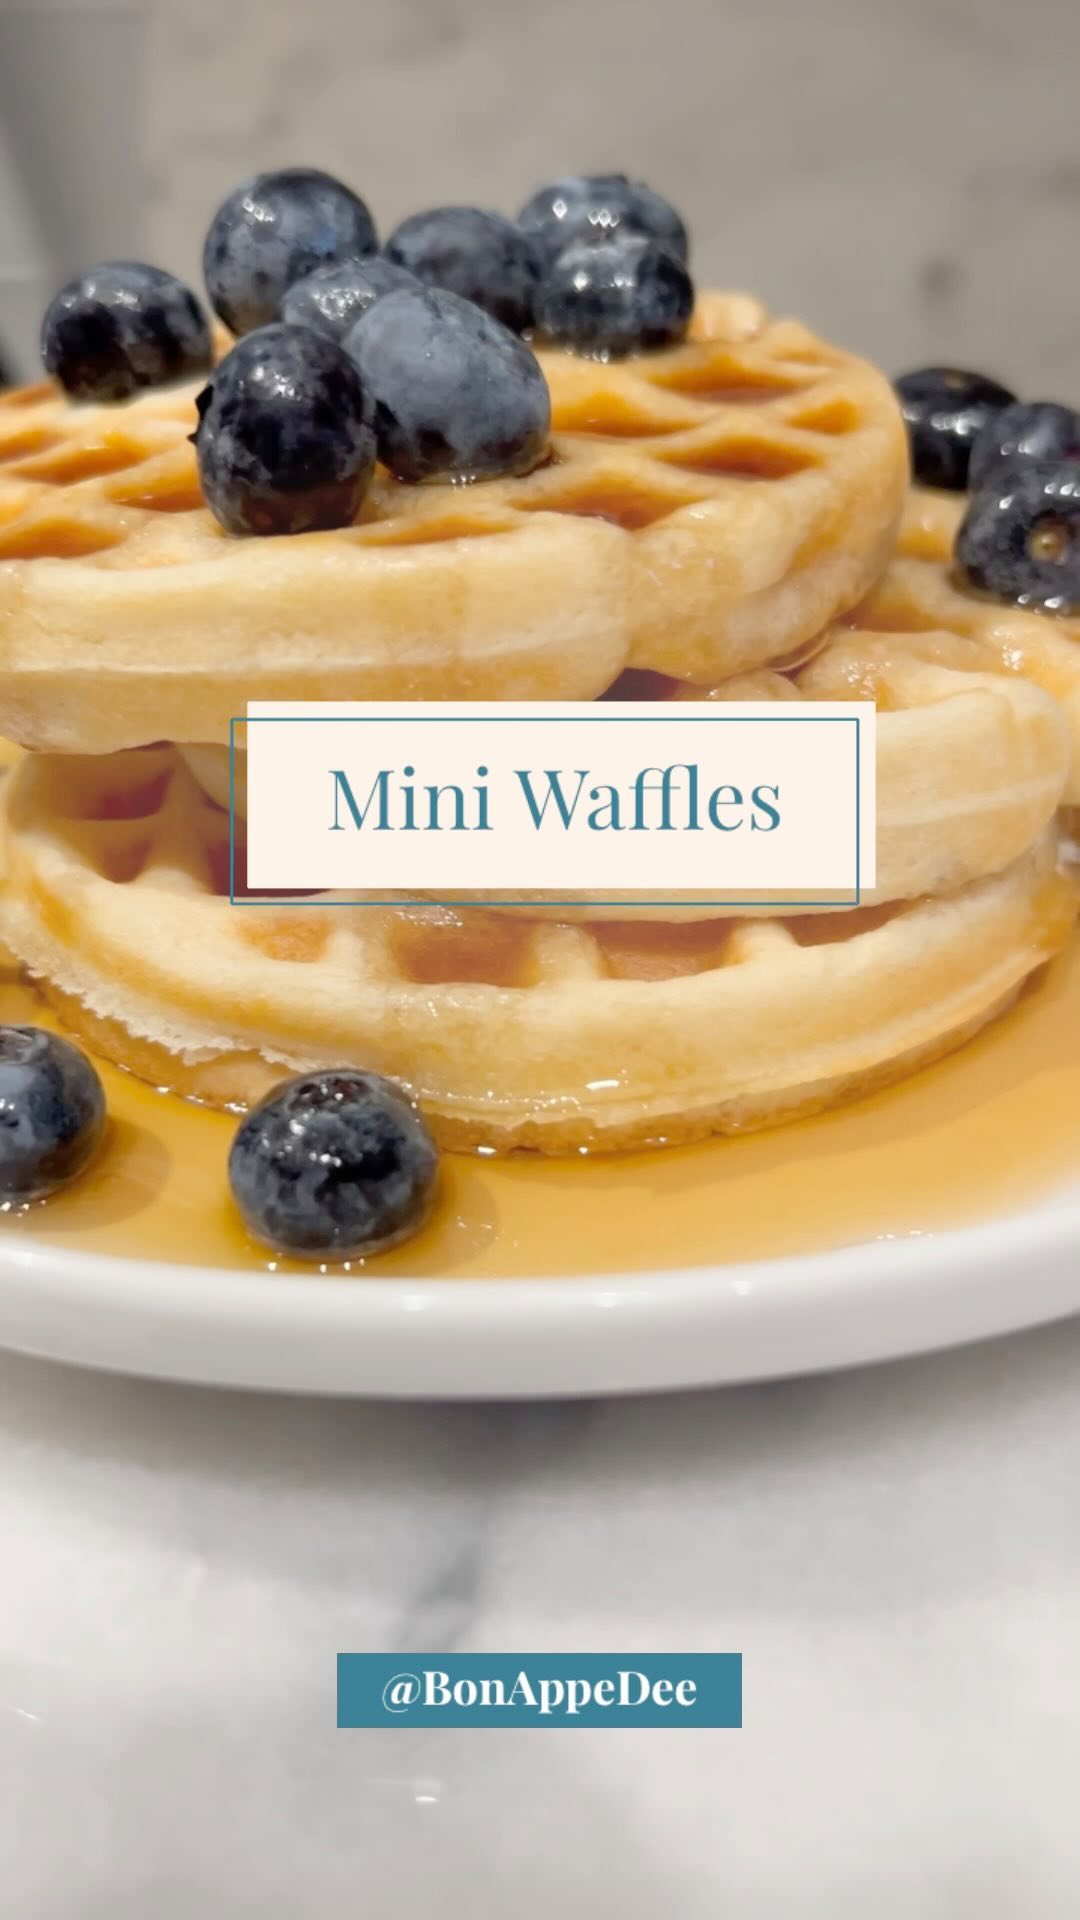 This $10 mini waffle maker is the only thing you need for a delicious brunch at home. 🧇 

(Tap 👉🏽 “kitchen picks” link in bio for item)

Even if you decide to use boxed waffle batter or a family recipe, these mini waffles are perfect for a weekend brunch indoors and perfect for portion control to maintain your fitness goals 🏋🏽‍♀️ 😉 
°°°
#weekendbrunch #waffles #wafflesforbreakfast #dcbrunch #dmvbrunch #brunchrecipes #dcfoodie #dcfoodblogger #foodbloggers #wafflerecipe #brunchrecipe #wafflesforbreakfast #breakfastideas #breakfastfood #wafflelove #brunch #wafflesarelife